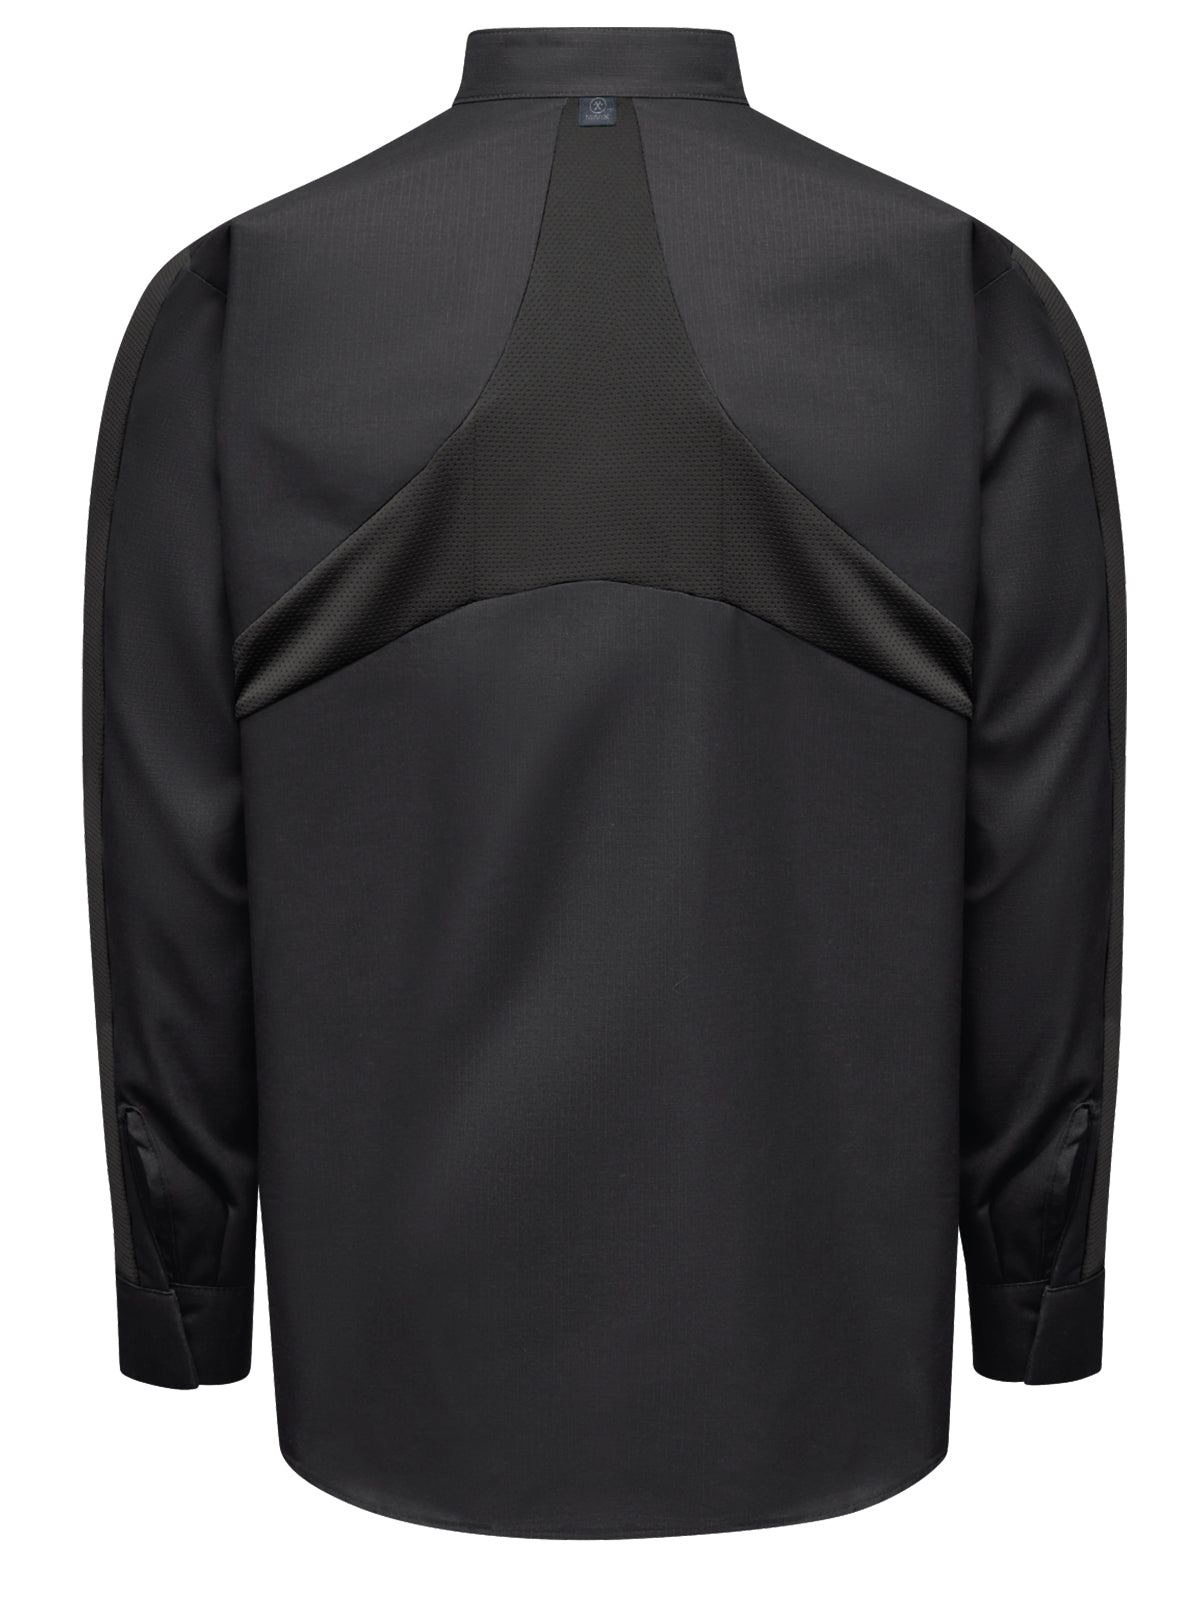 Men's Long Sleeve Two-Tone Pro+ Work Shirt with OilBlok and MIMIX™ - SX36 - Black